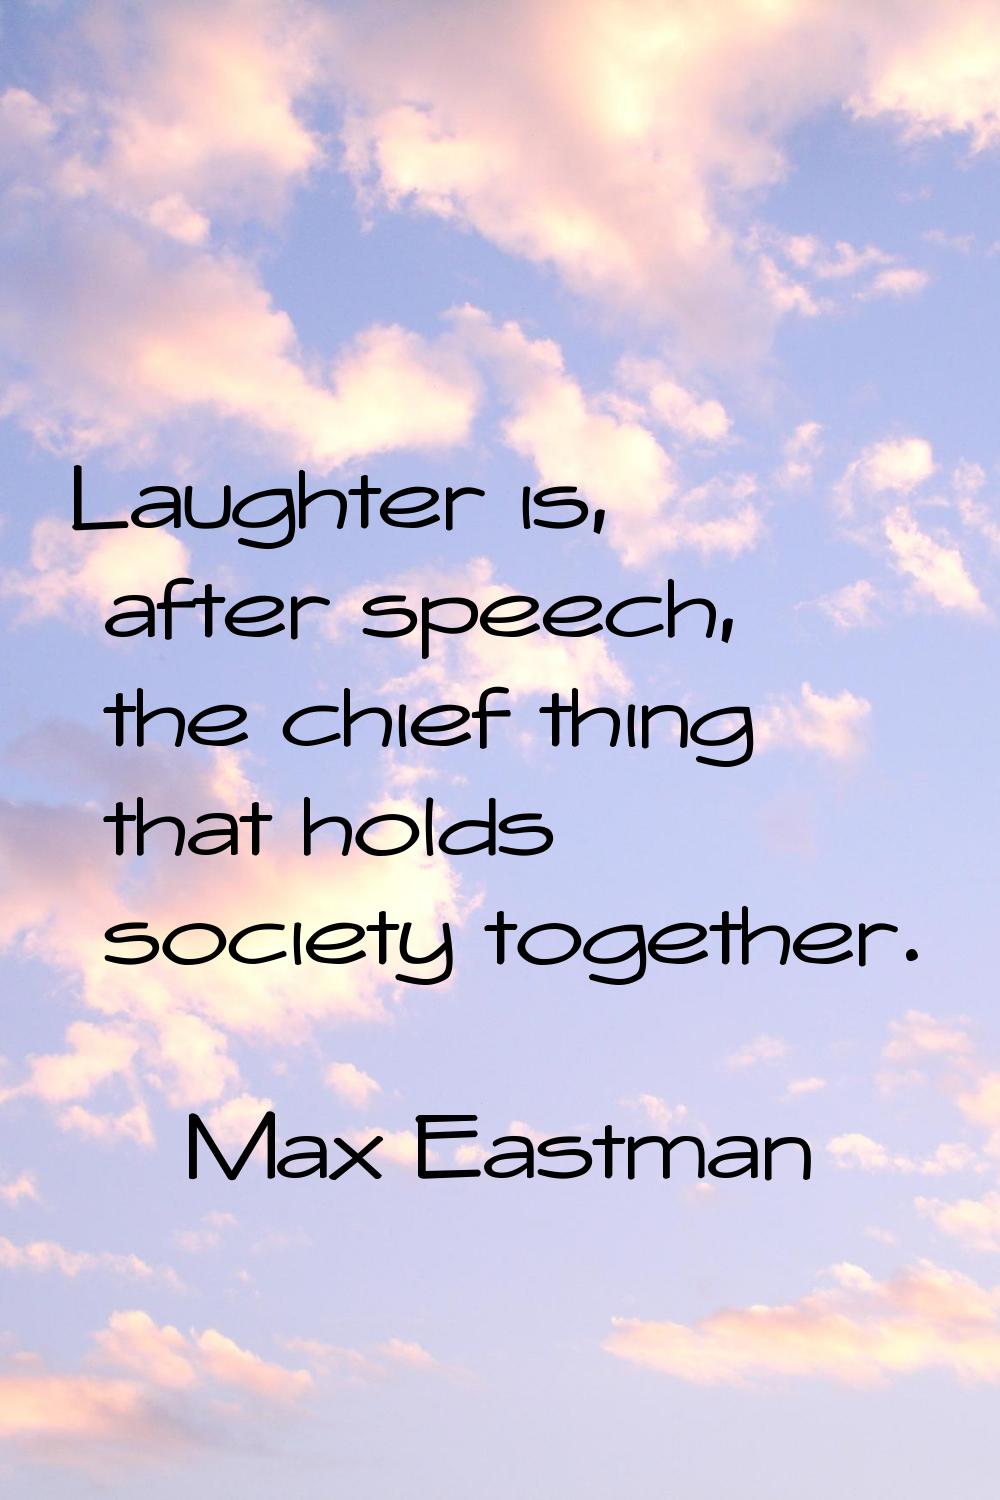 Laughter is, after speech, the chief thing that holds society together.